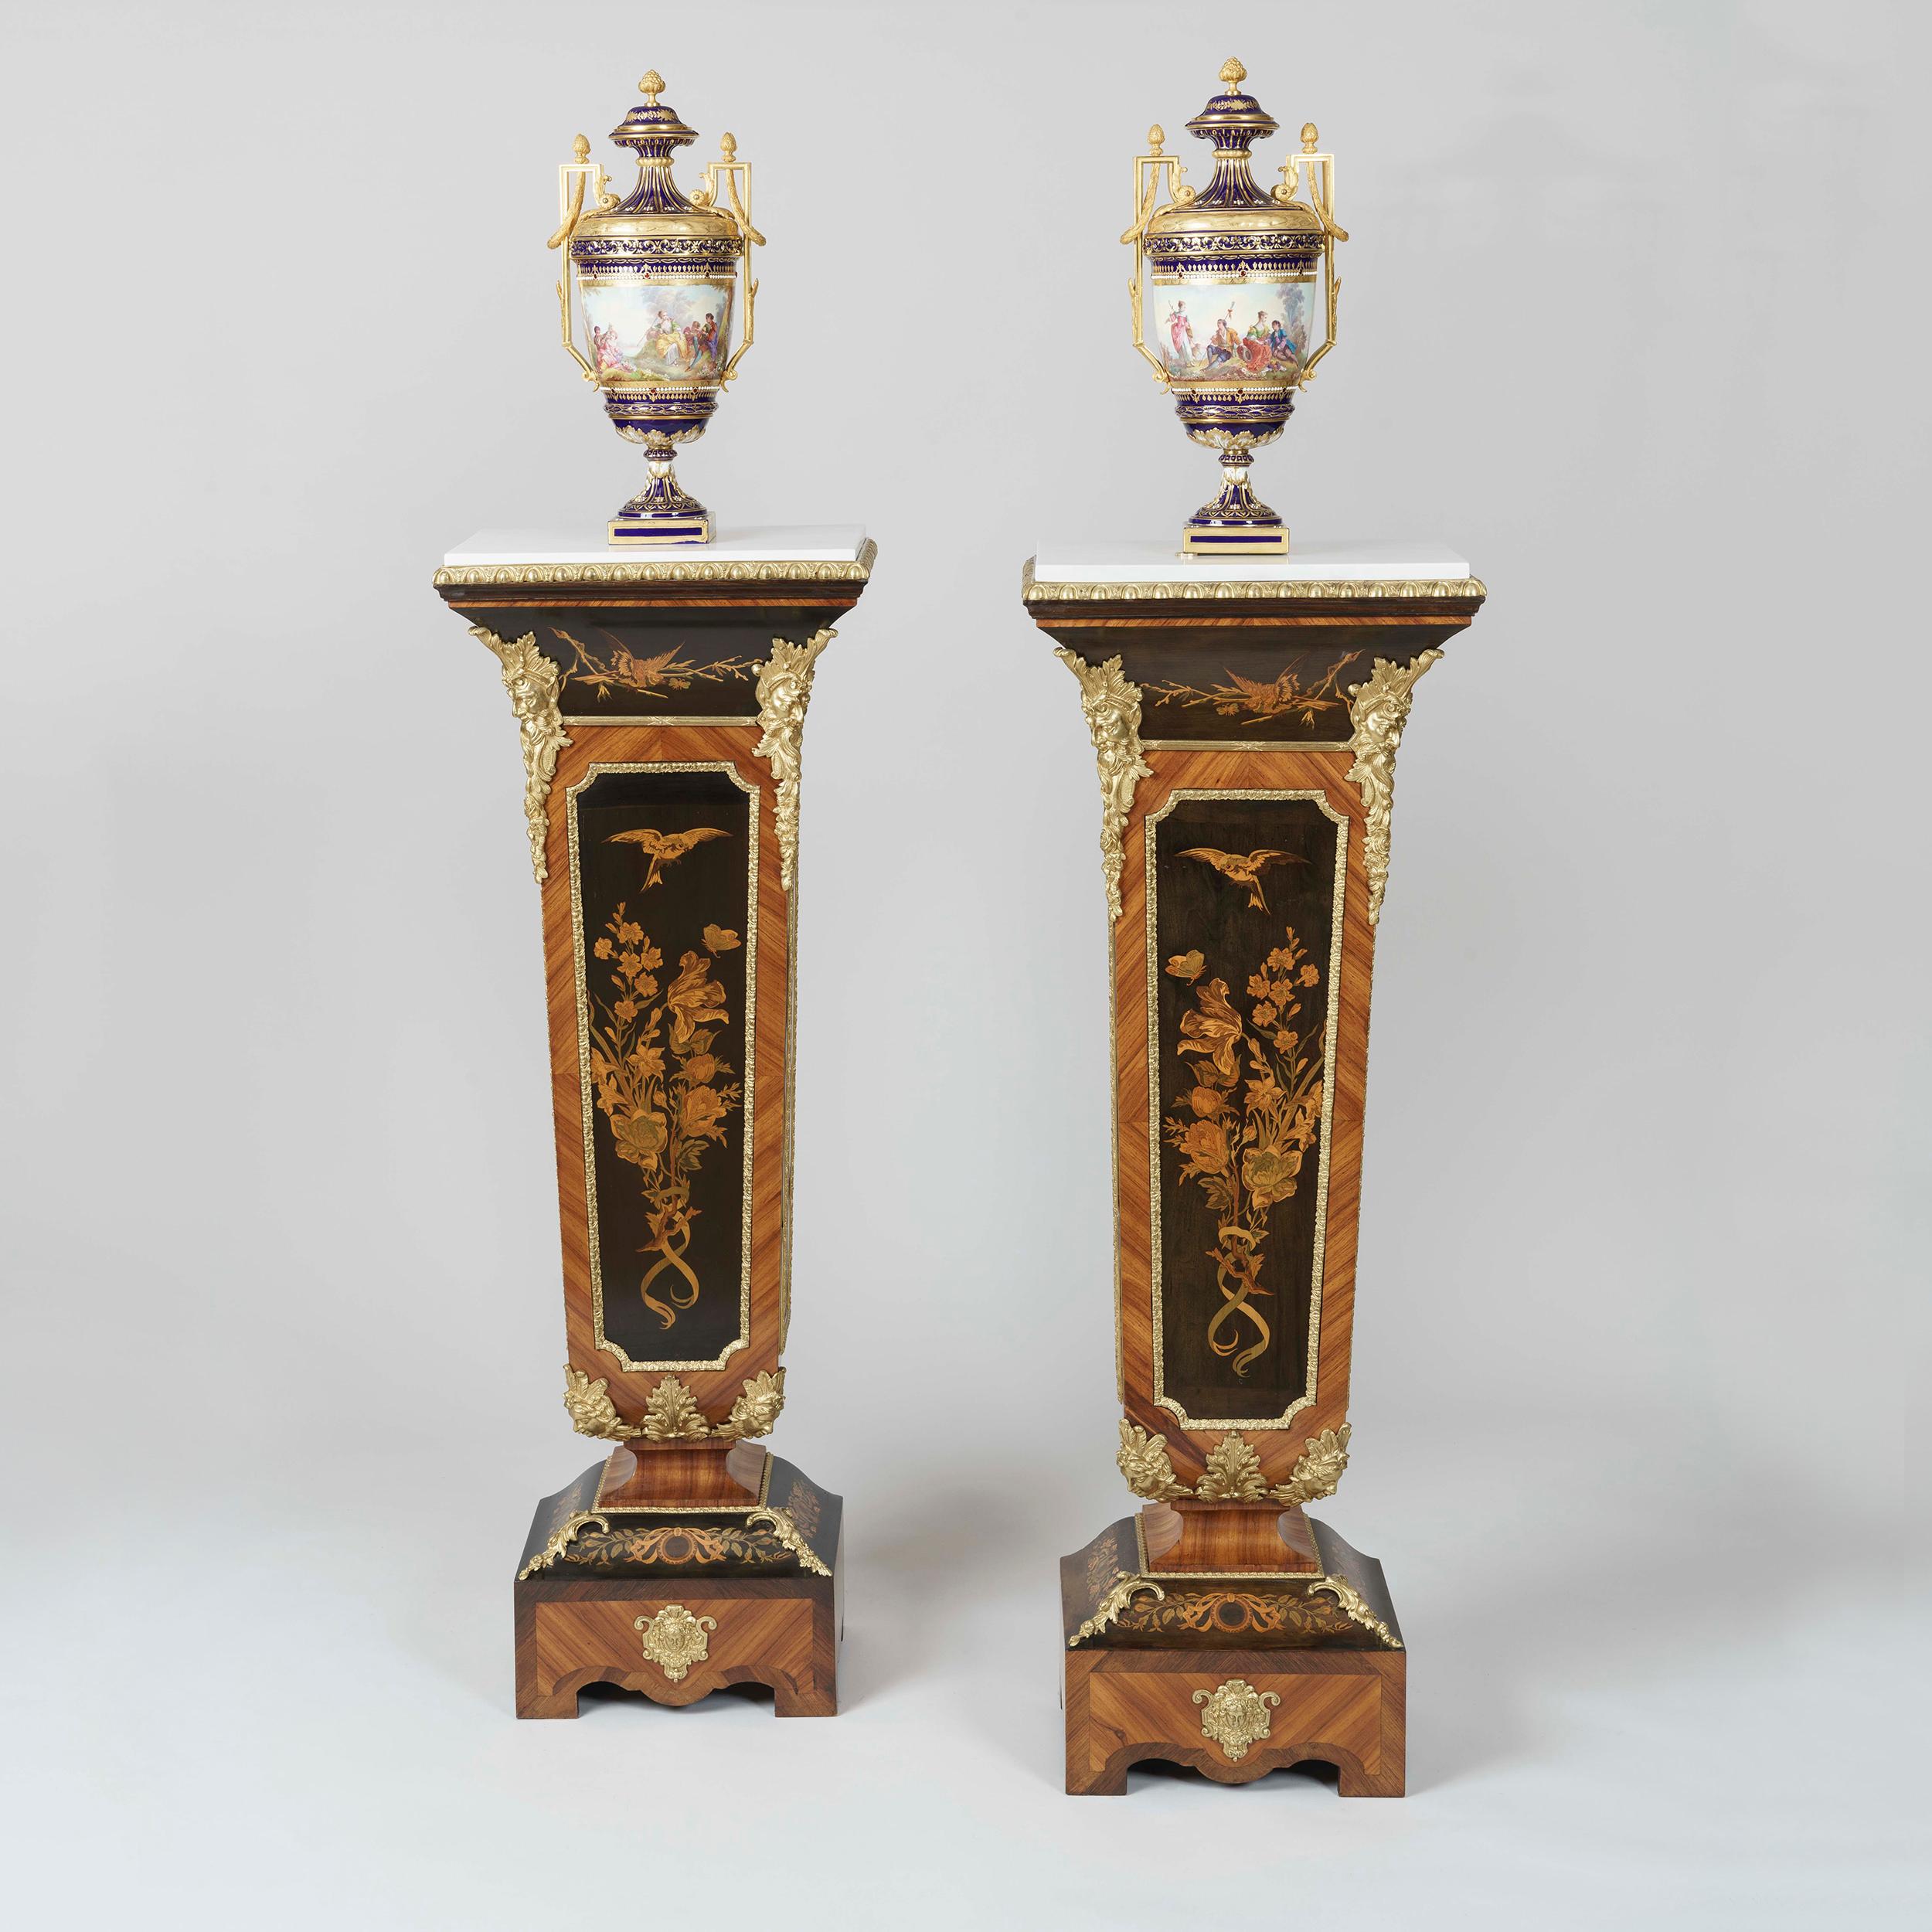 A pair of marquetry and Ormolu-mounted pedestals
Attributed to Joseph Cremer

Constructed from tulipwood, each pedestal of tapering rectangular form and dressed with ornamental gilt bronze mounts of female and bacchic masks, the front